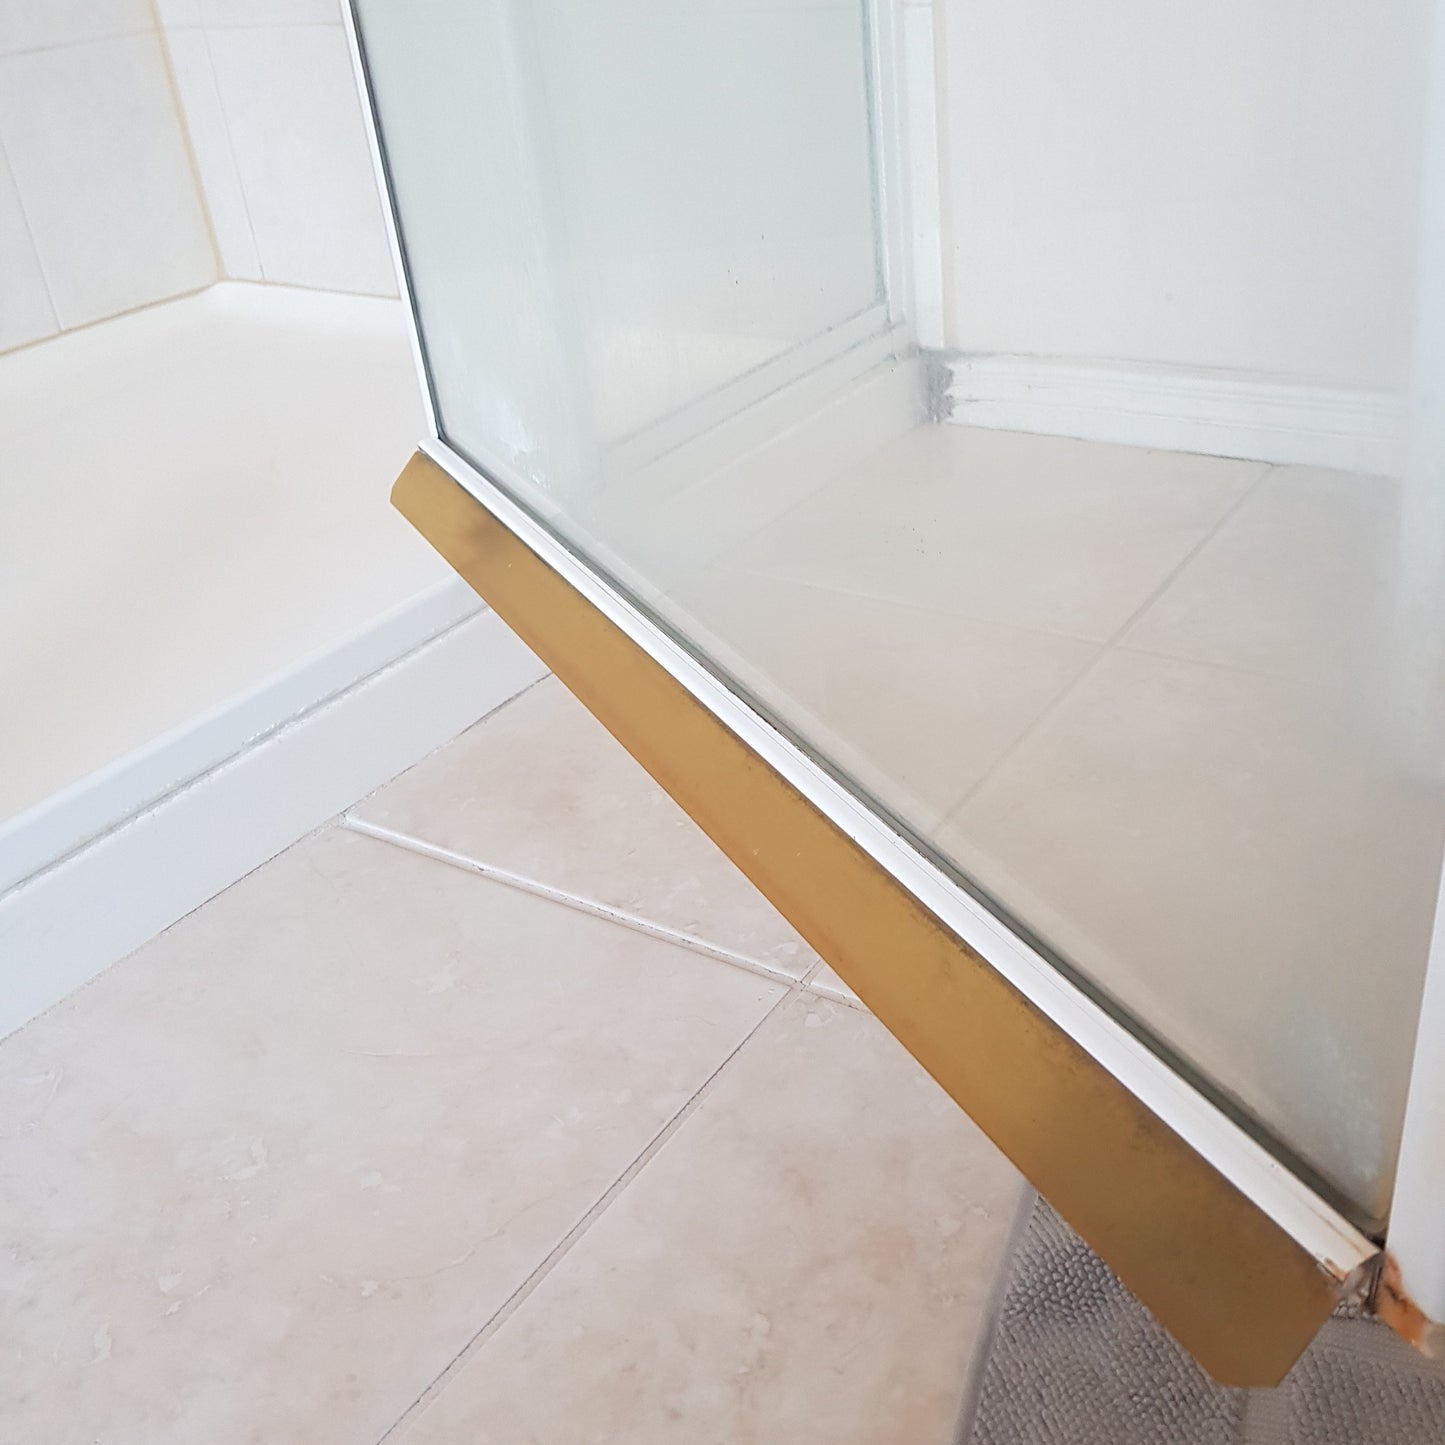 Shower Sweep/Water guard - suits Stegbar Softline - sold 1 x 900mm length